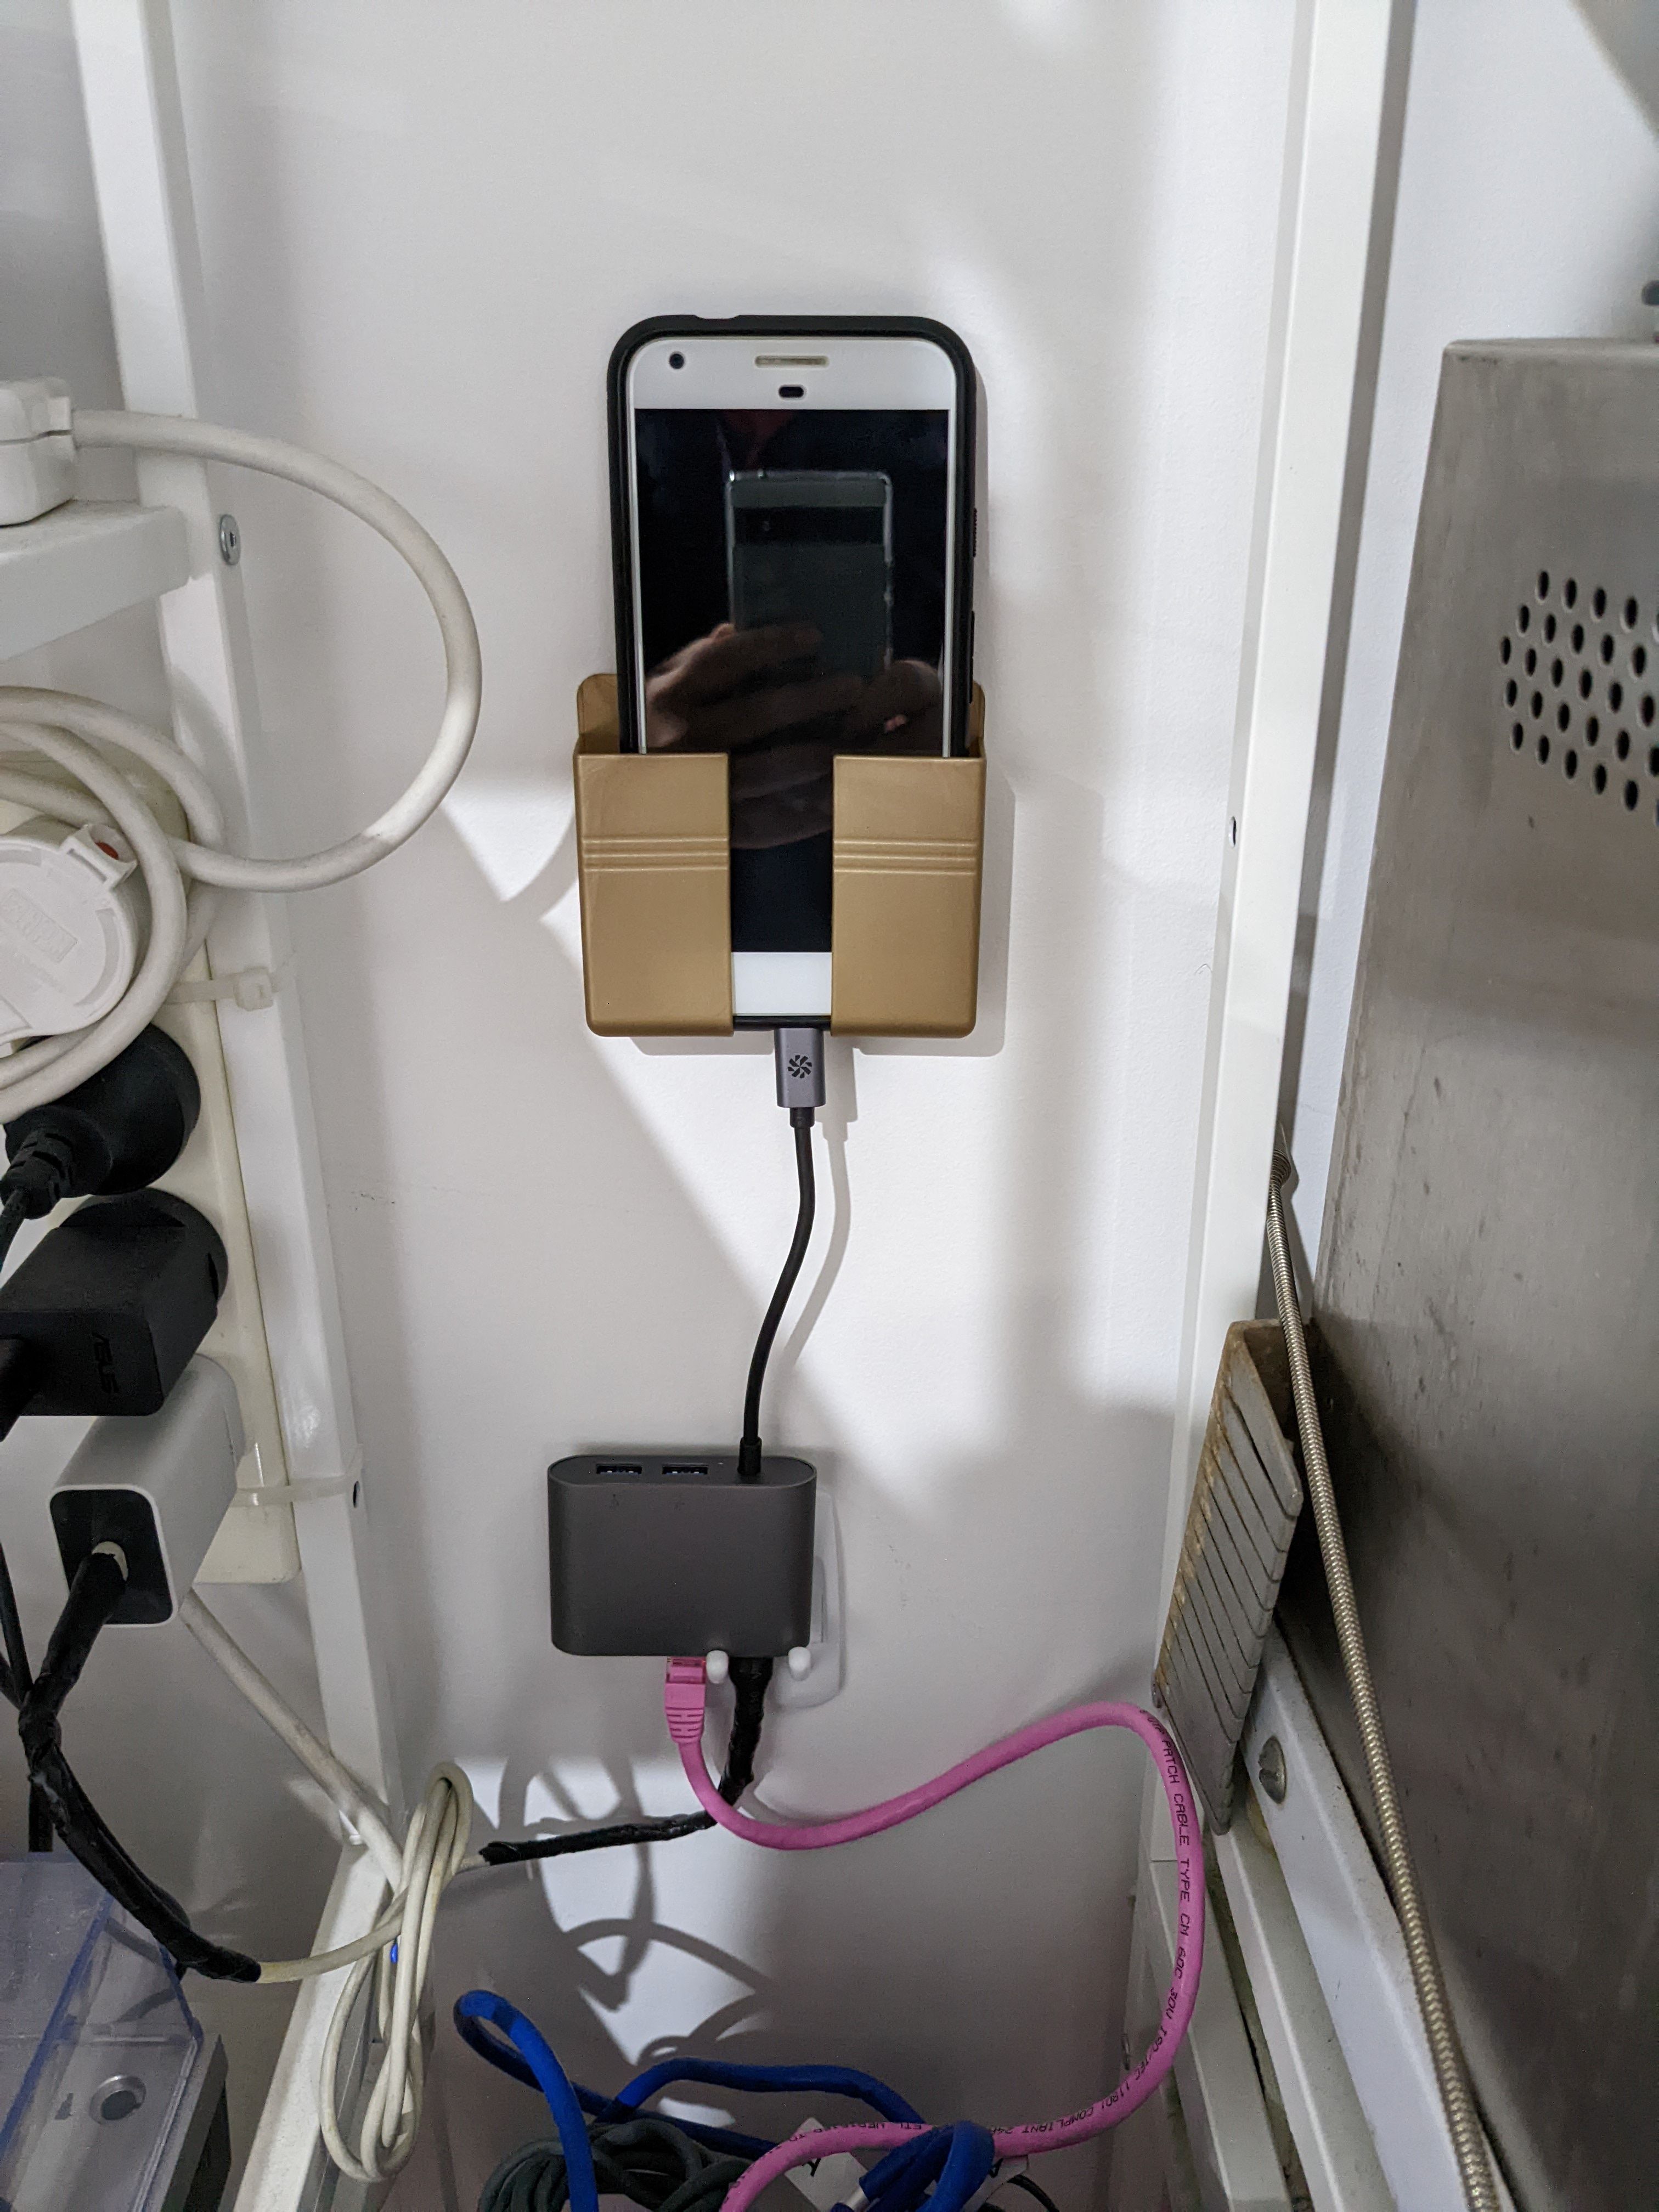 Photo of a Pixel phone in a closet, connected to a USB hub